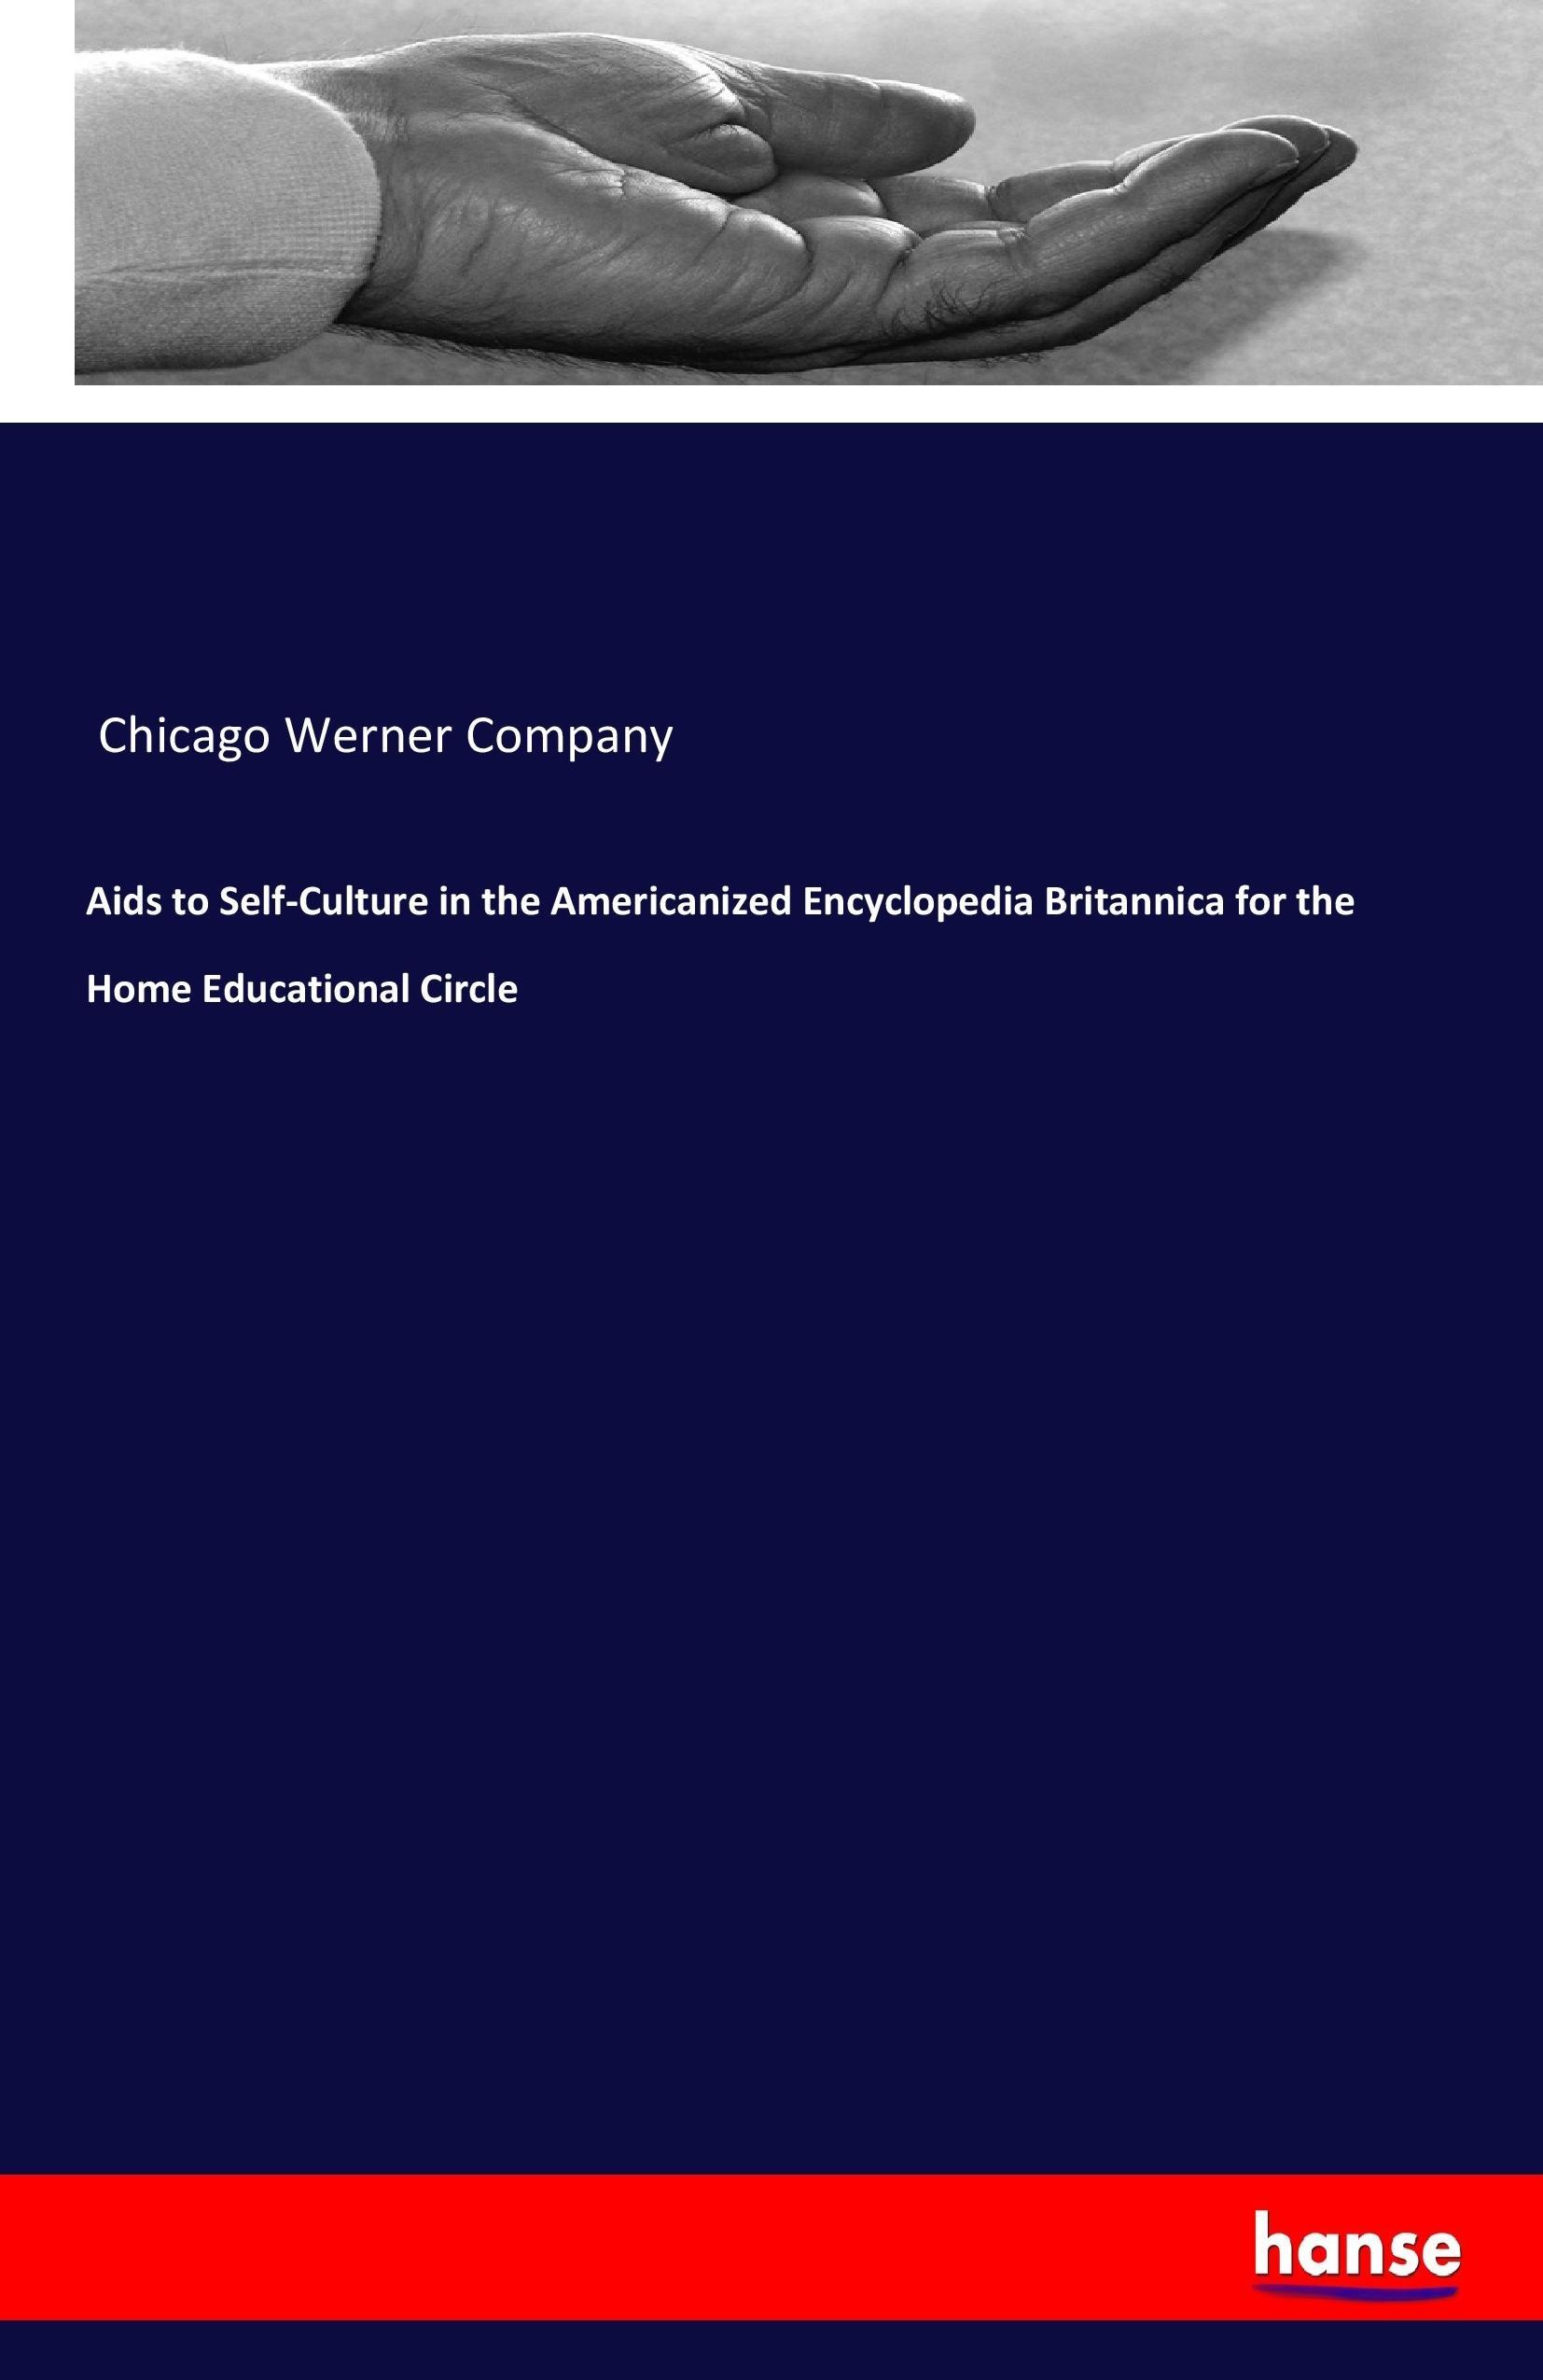 Aids to Self-Culture in the Americanized Encyclopedia Britannica for the Home Educational Circle - Chicago Werner Company